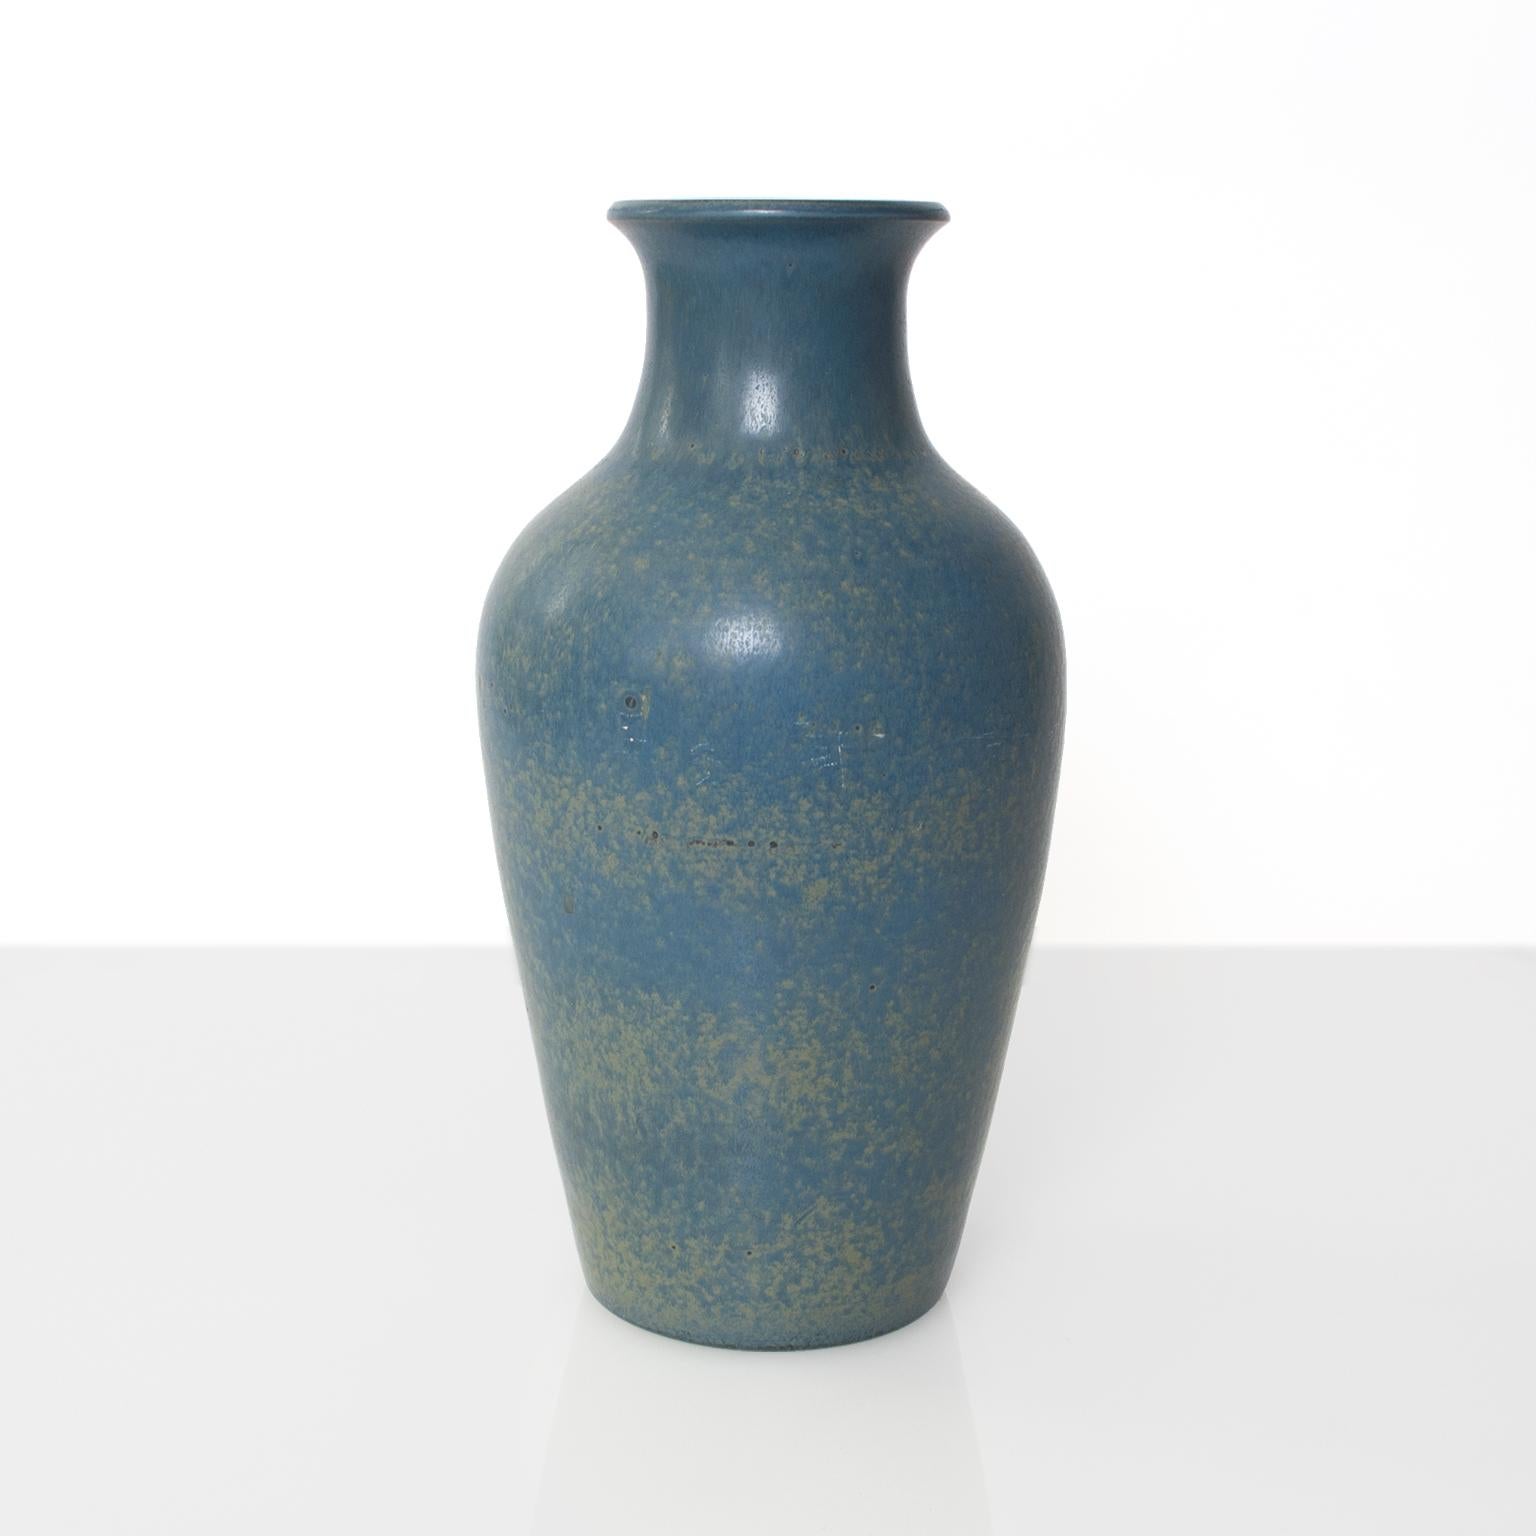 Scandinavian Modern midcentury ceramic vase with a beautiful blue speckled glaze by Gunnar Nylund for Rörstrand, circa 1940-1950.
 
Measures: Height 10.75